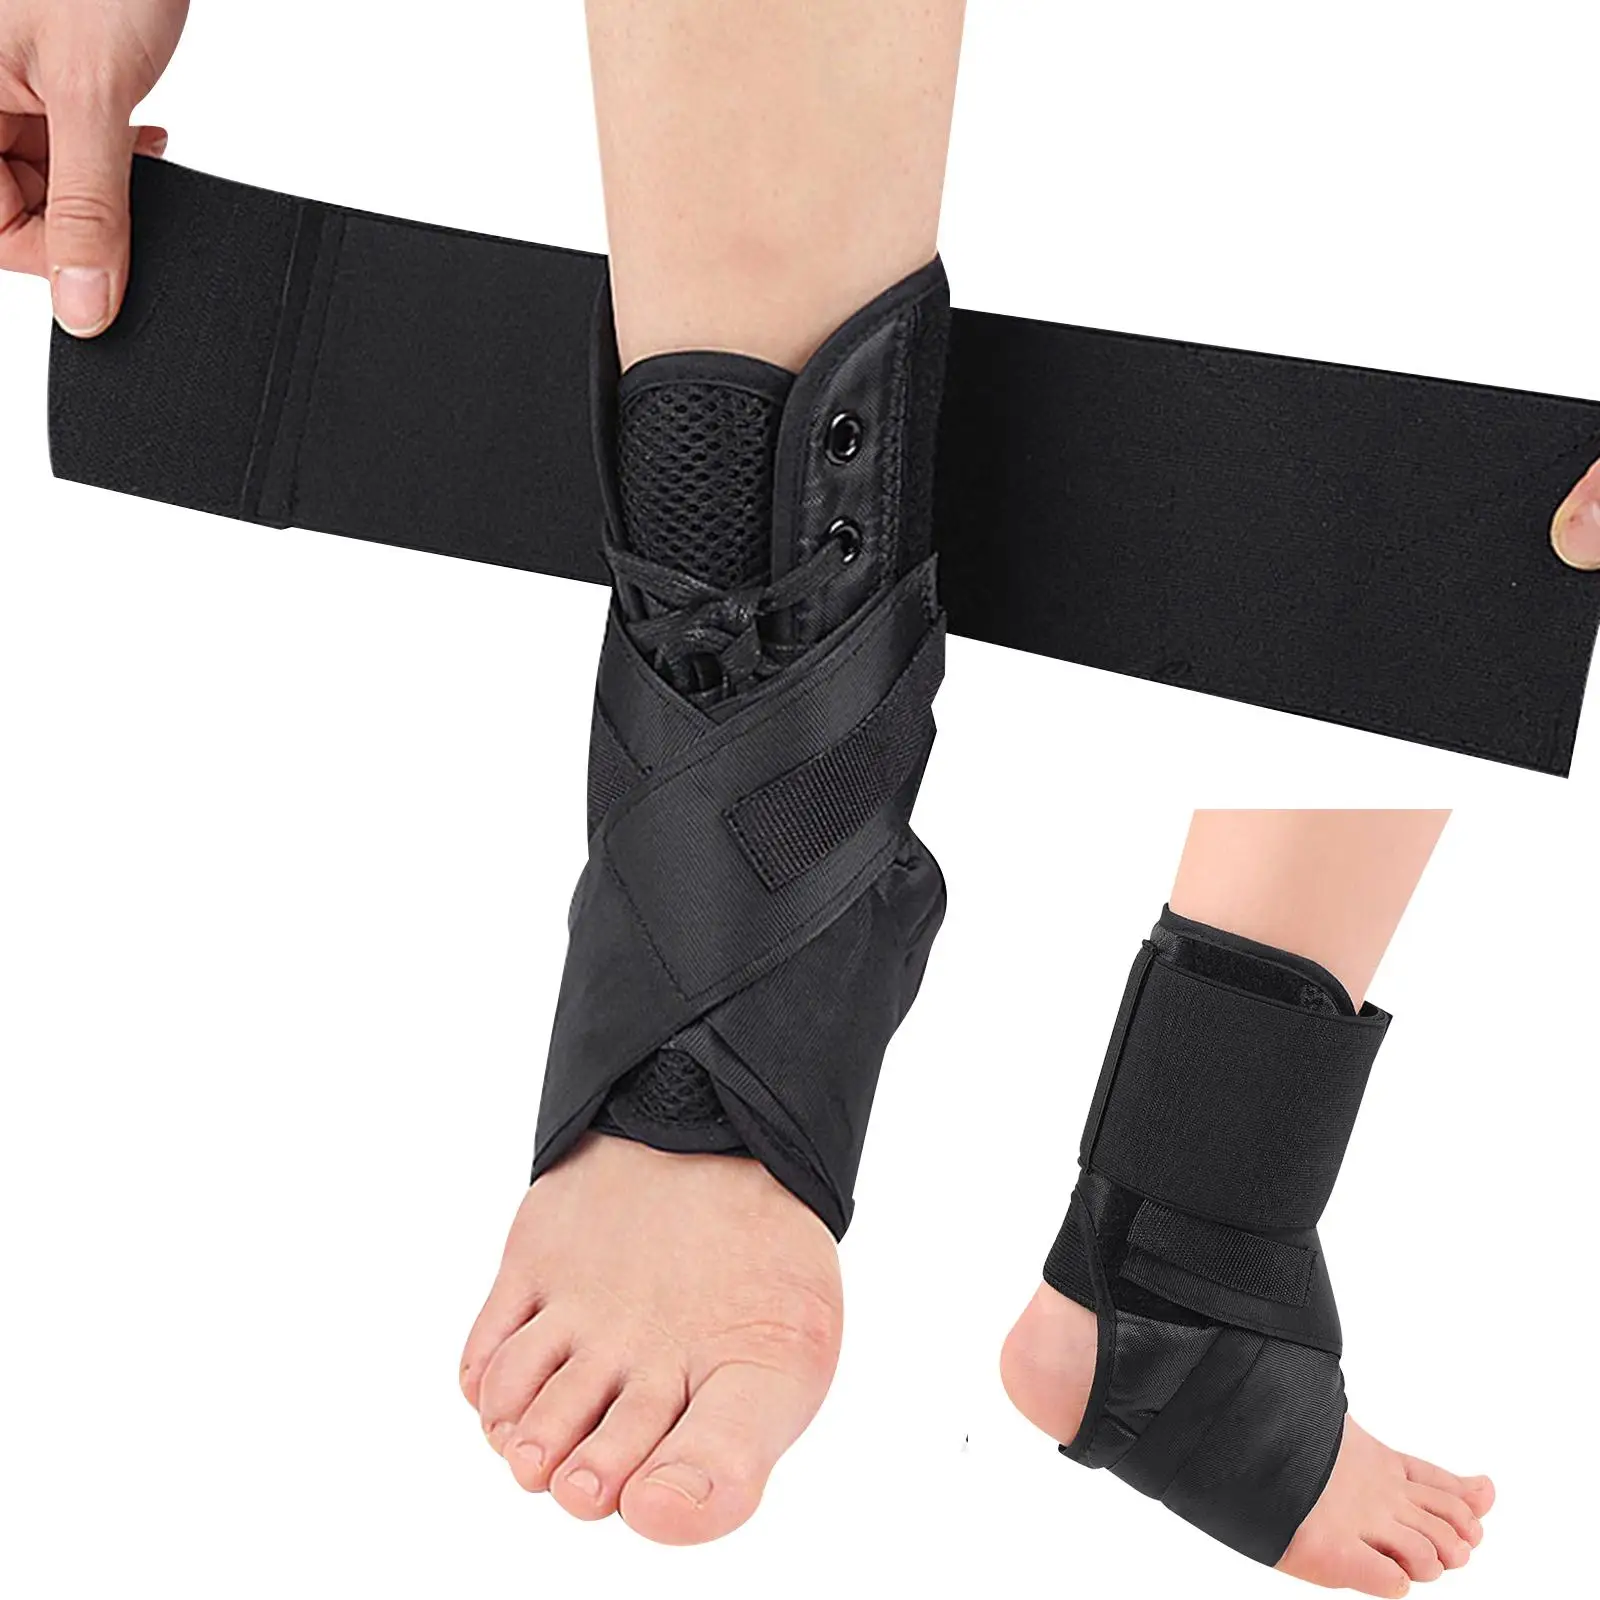 Ankle Support Brace lace Adjustable support Sprained Tennis